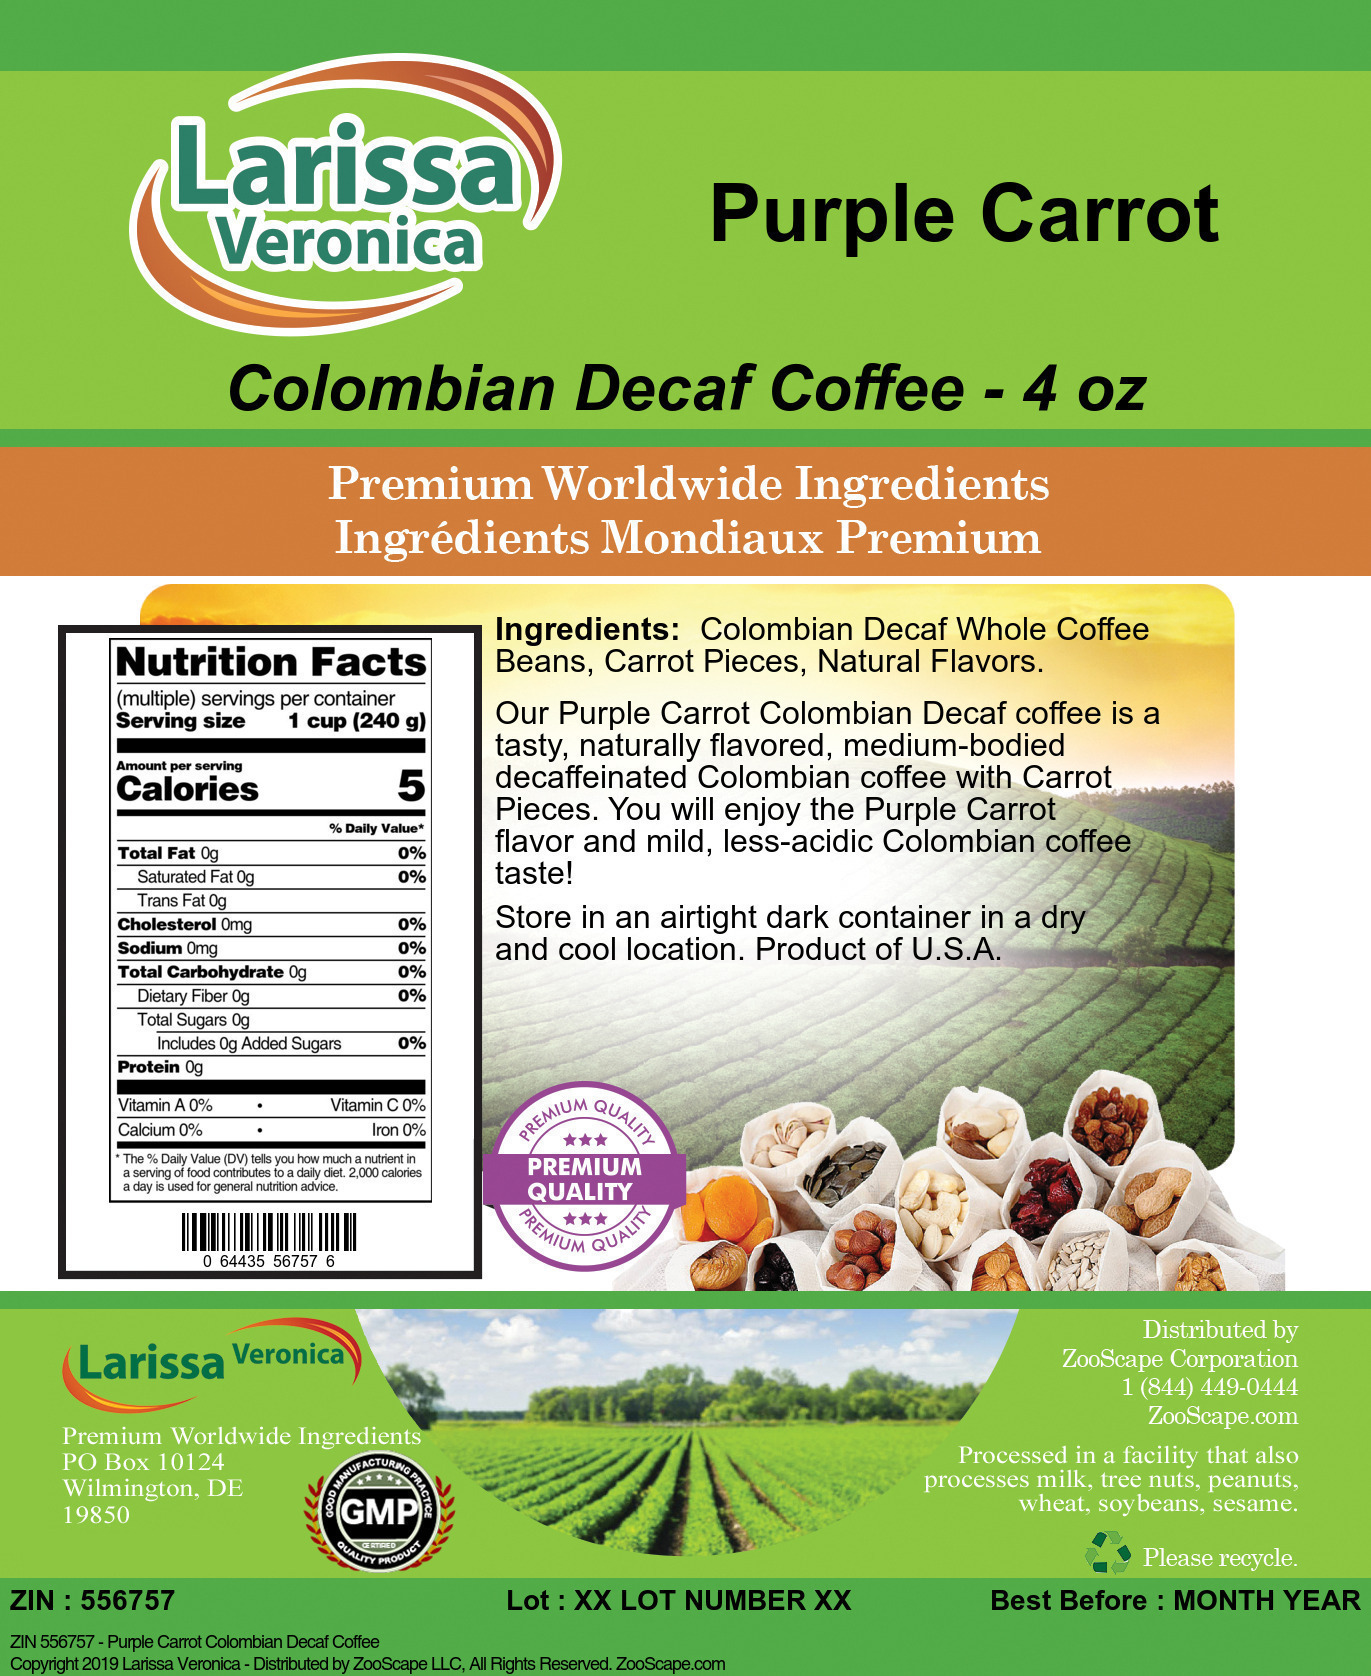 Purple Carrot Colombian Decaf Coffee - Label